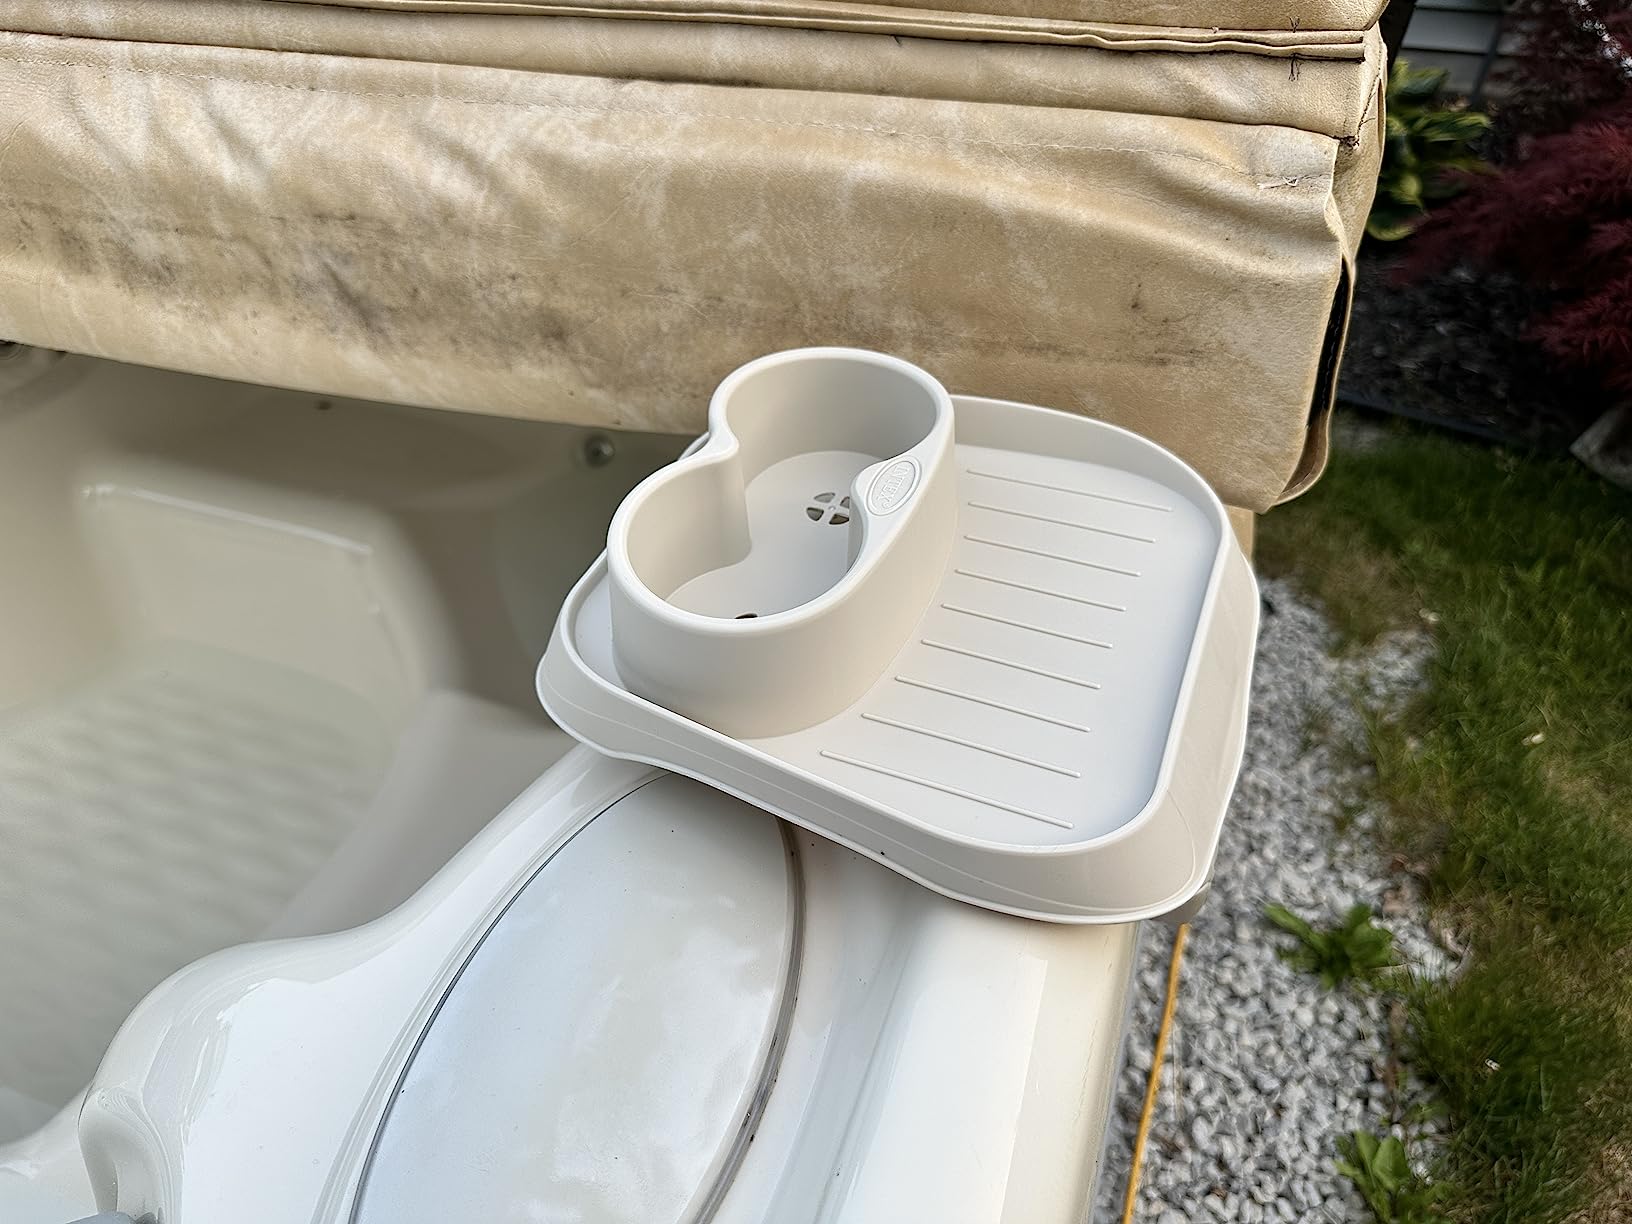 Hot Tub (2) Cup Holder